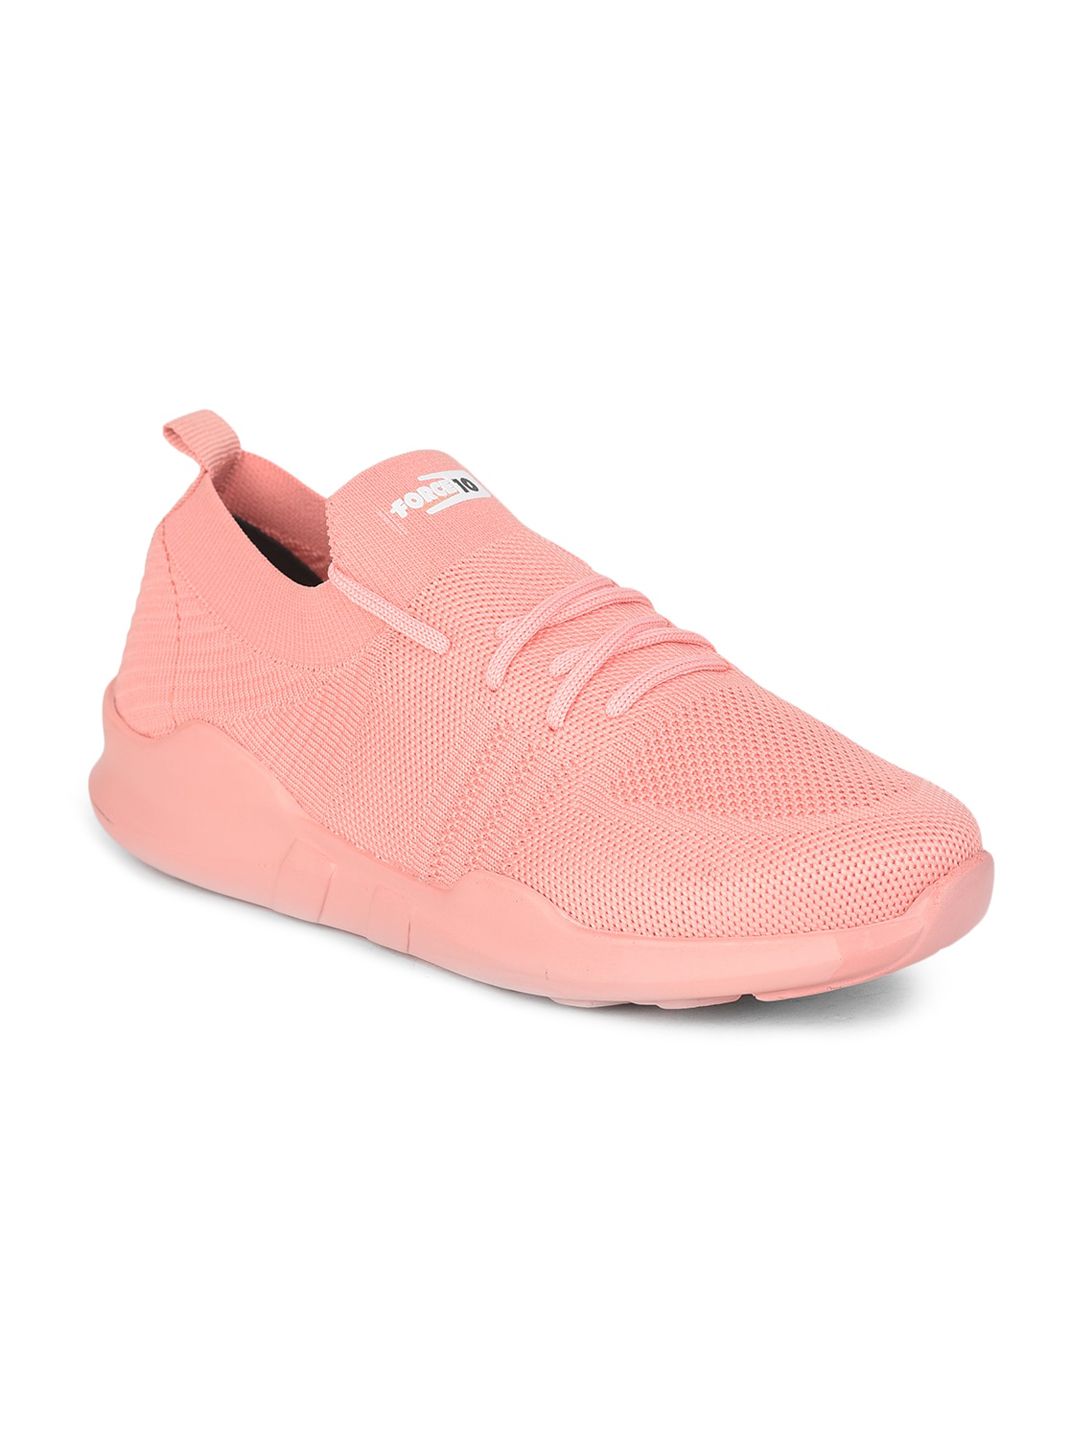 Liberty Women Peach-Coloured Textured PU Sneakers Price in India